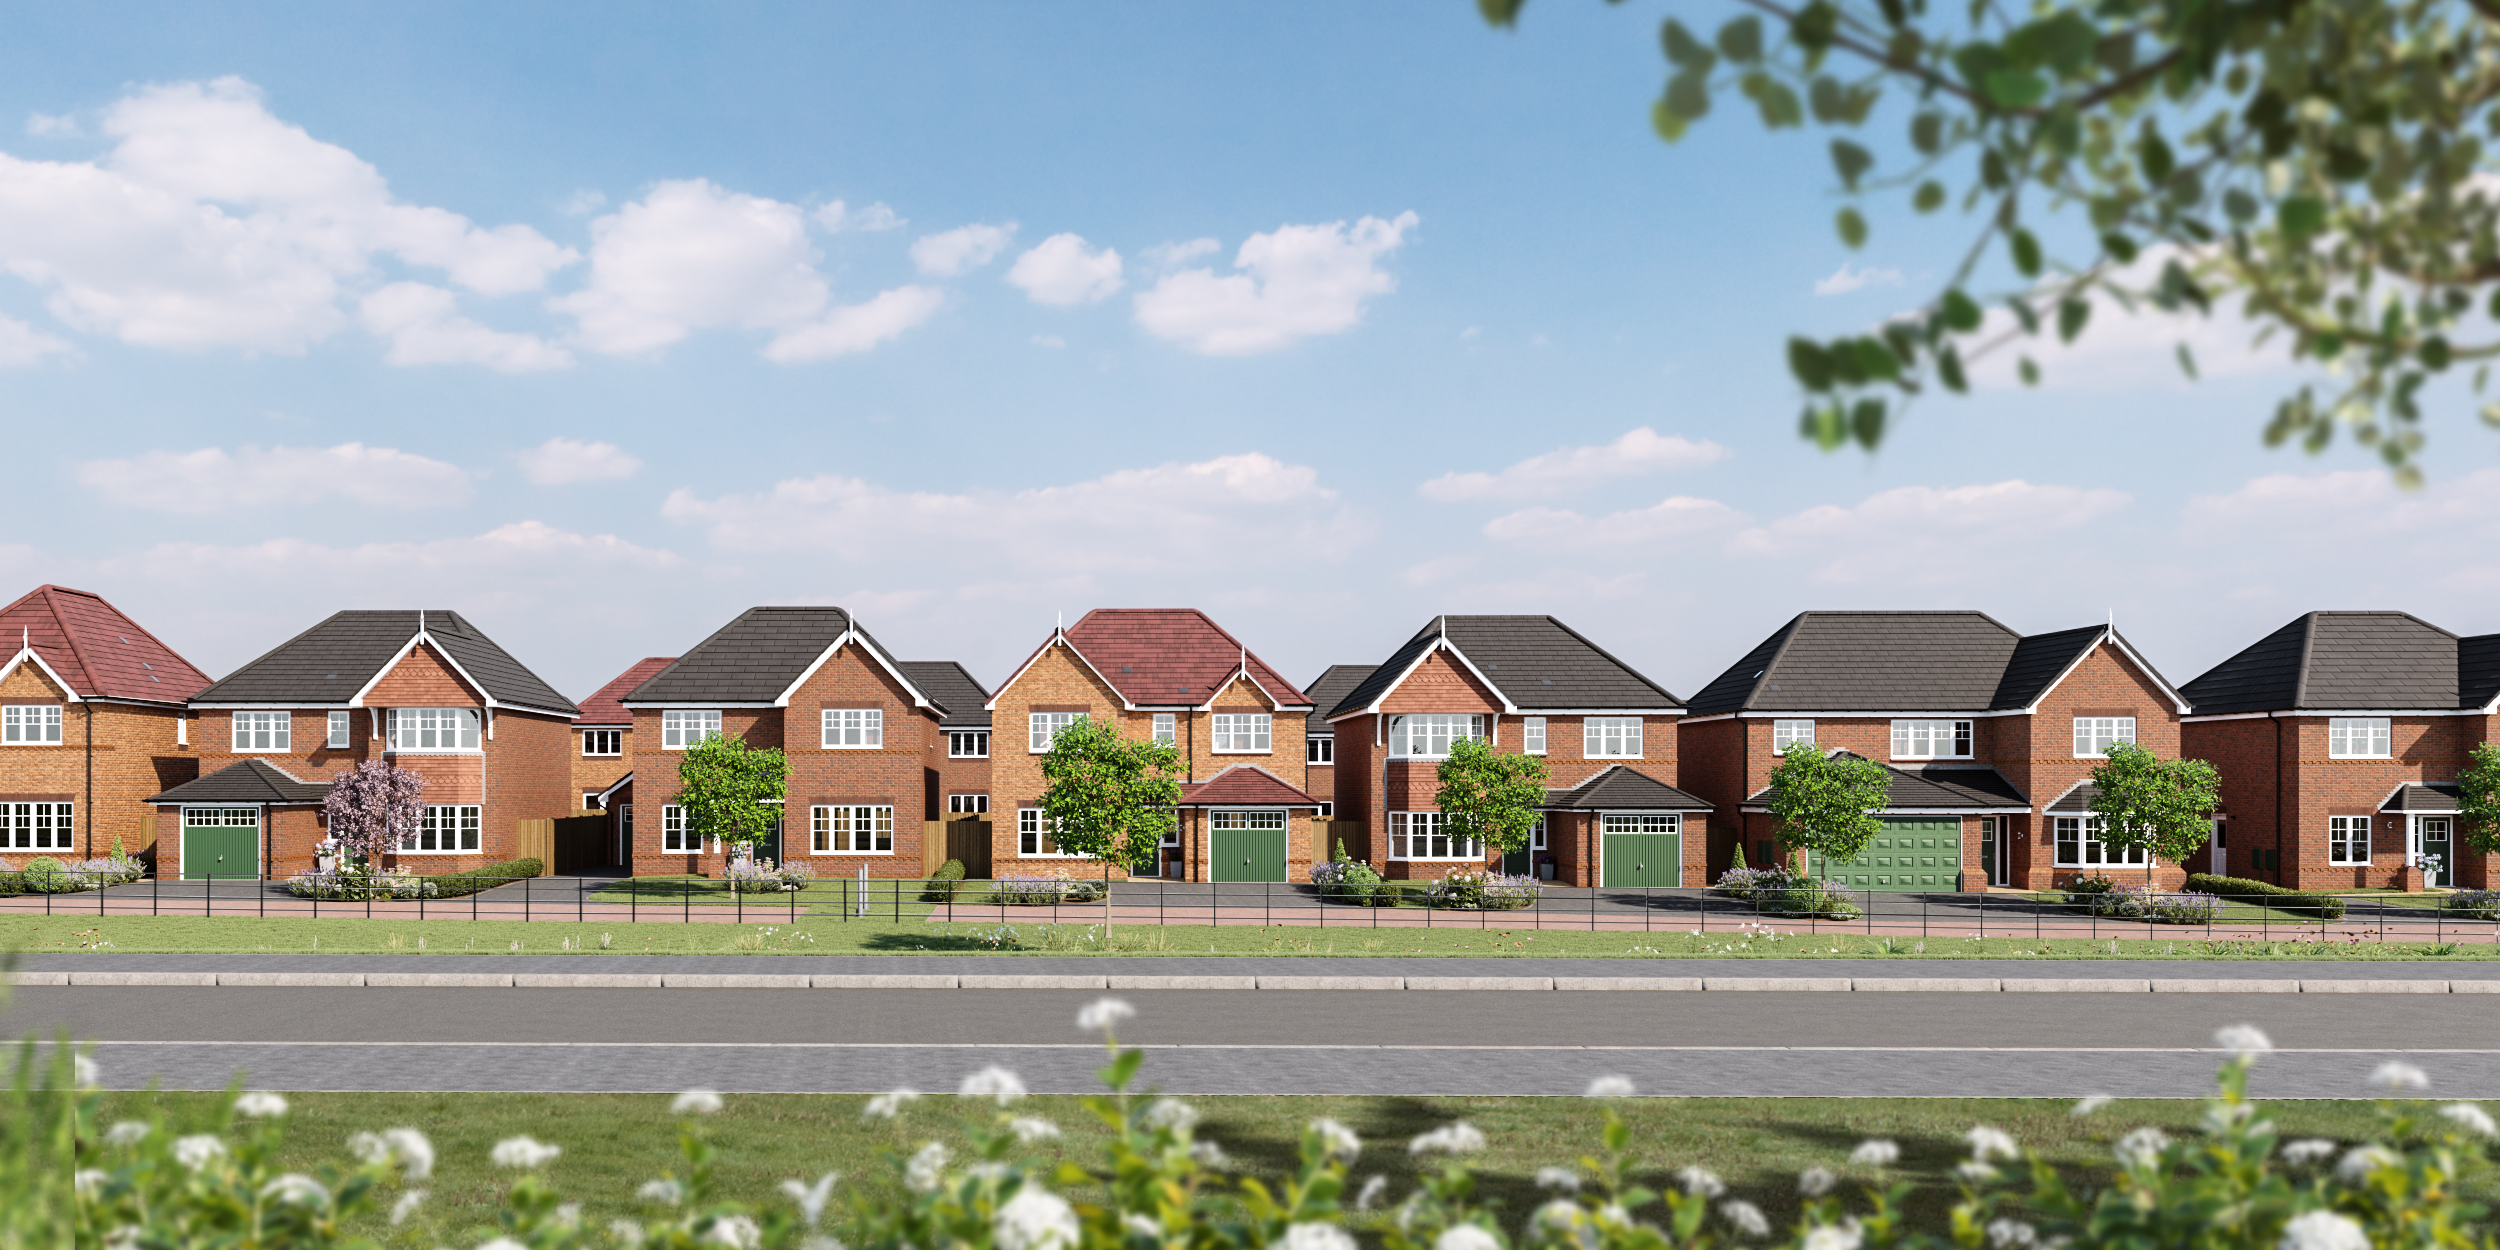 A CGI of the new homes on the latest phase of Anwyl’s Priory Gardens development in Burscough  